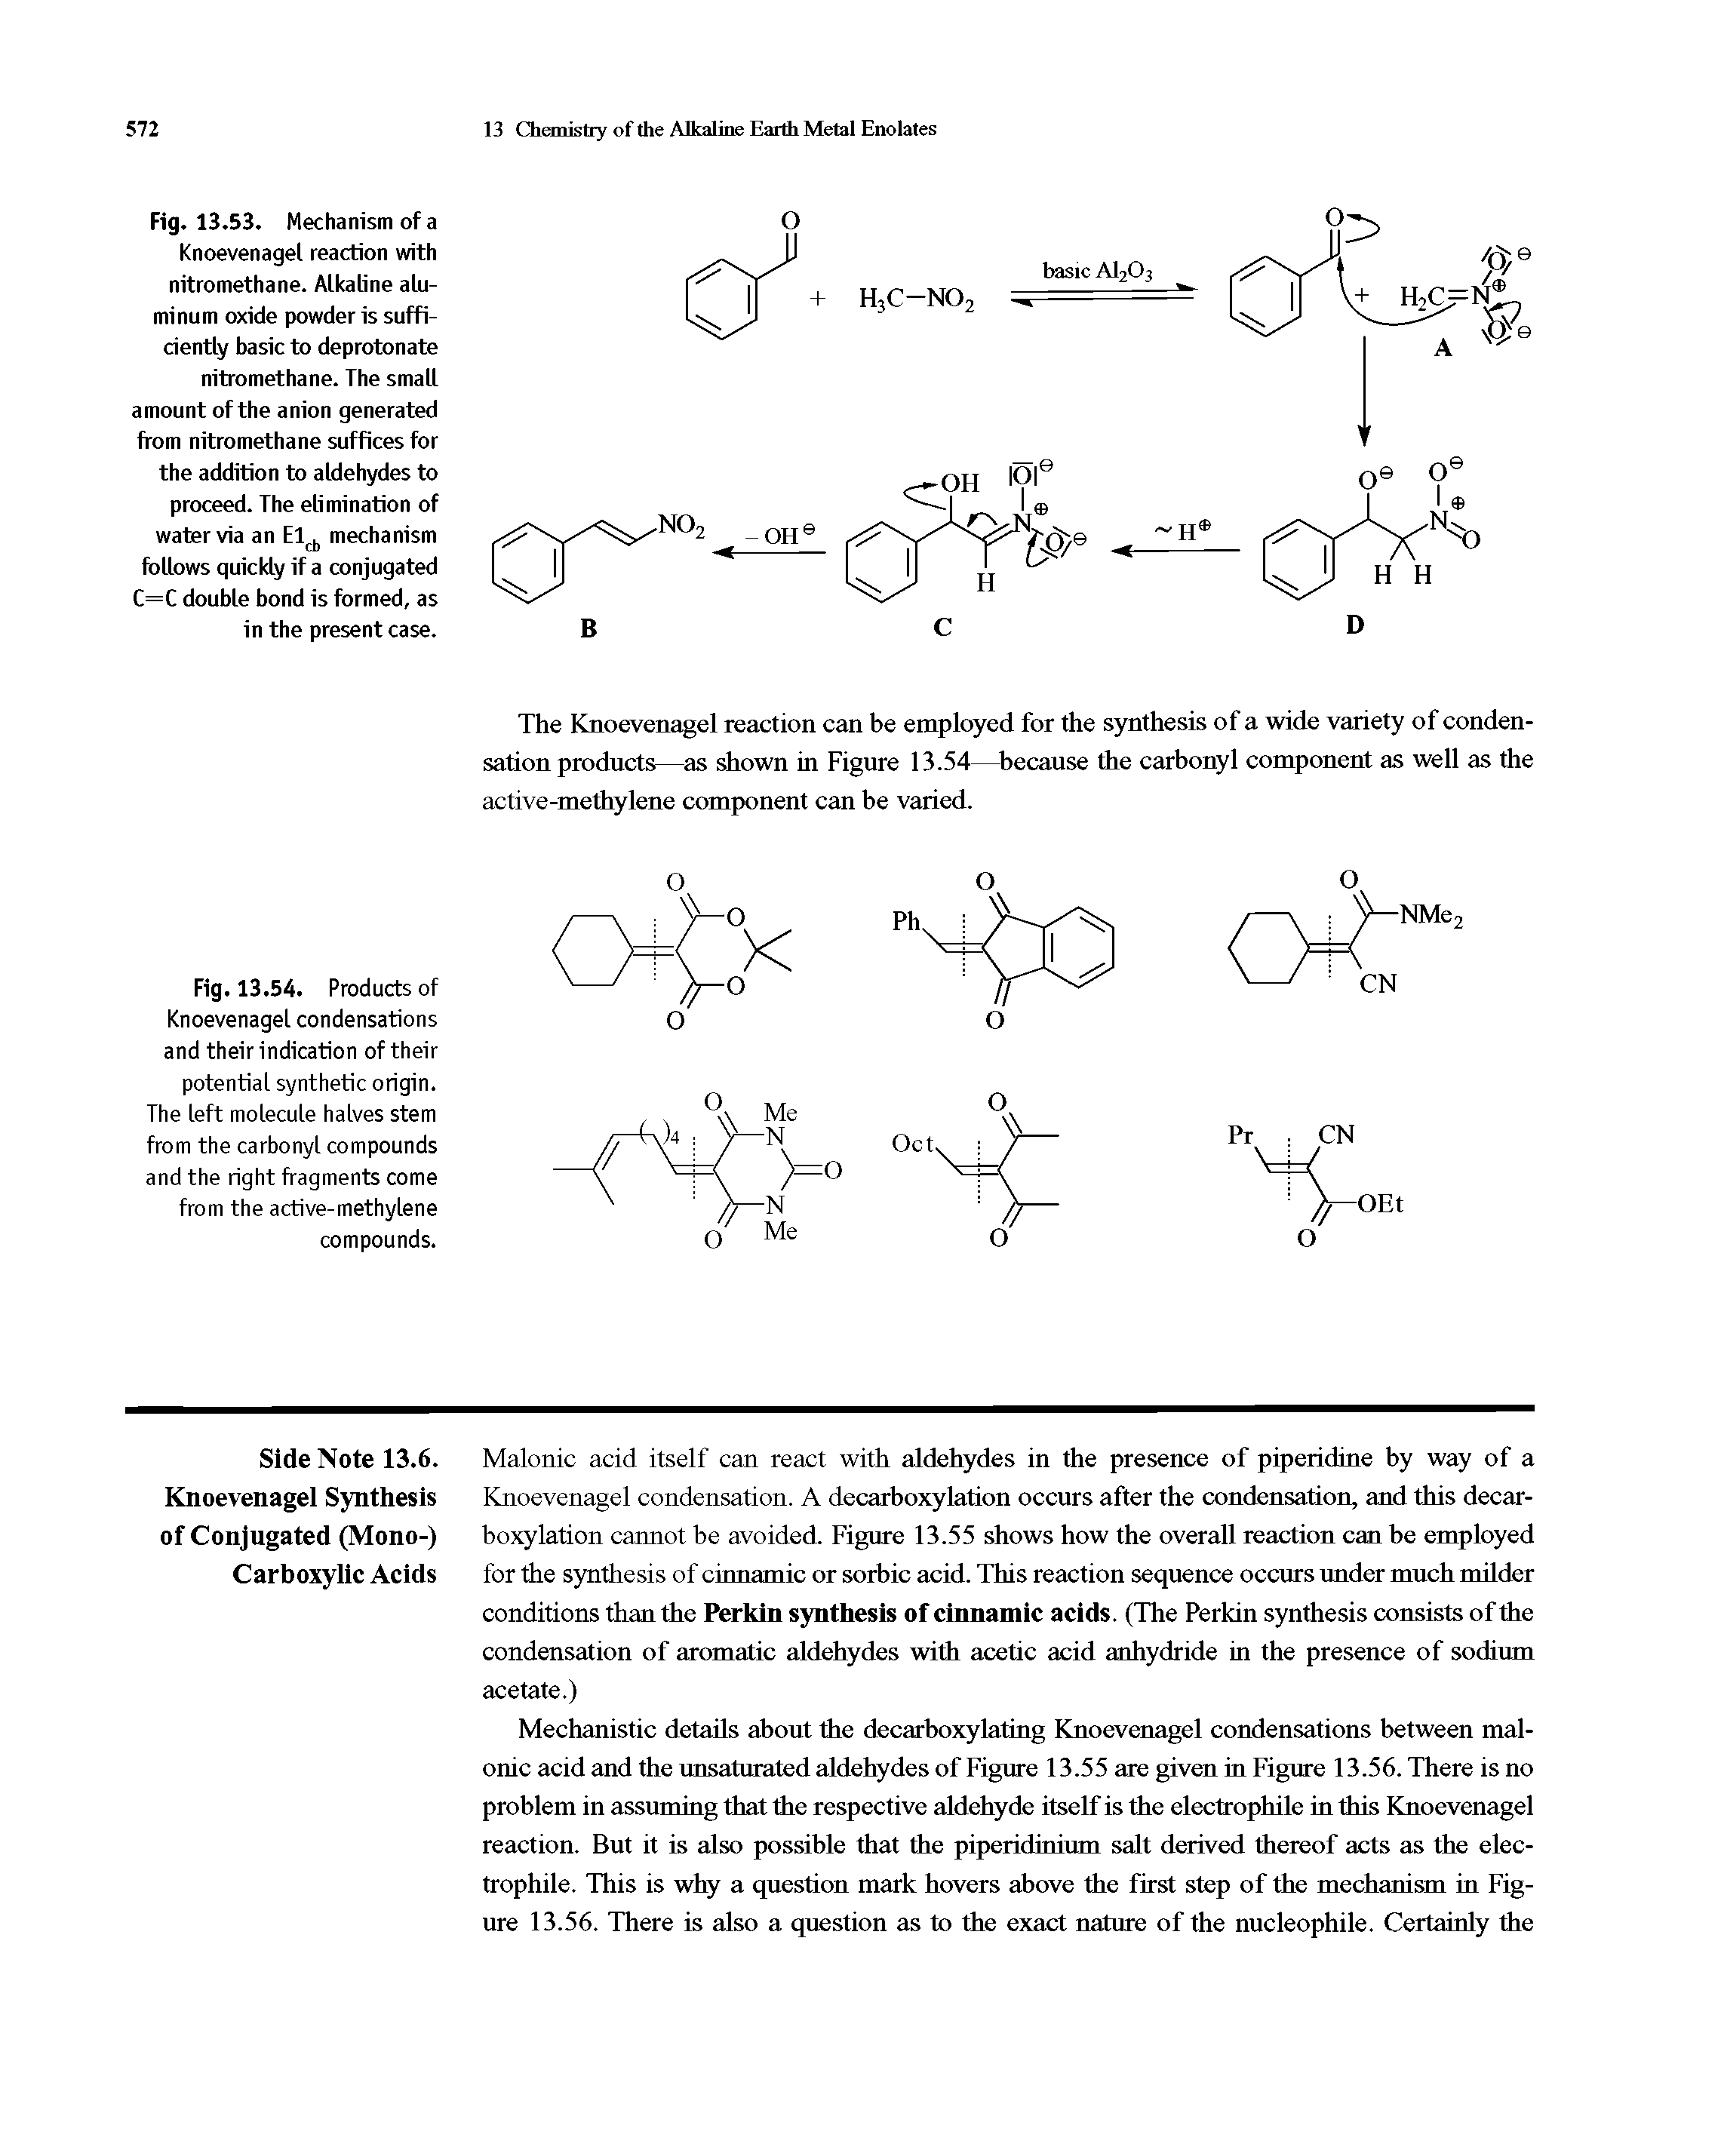 Fig. 13.53. Mechanism of a Knoevenagel reaction with nitromethane. Alkaline aluminum oxide powder is sufficiently basic to deprotonate nitromethane. The small amount of the anion generated from nitromethane suffices for the addition to aldehydes to proceed. The elimination of water via an Elib mechanism follows quickly if a conjugated C=C double bond is formed, as in the present case.